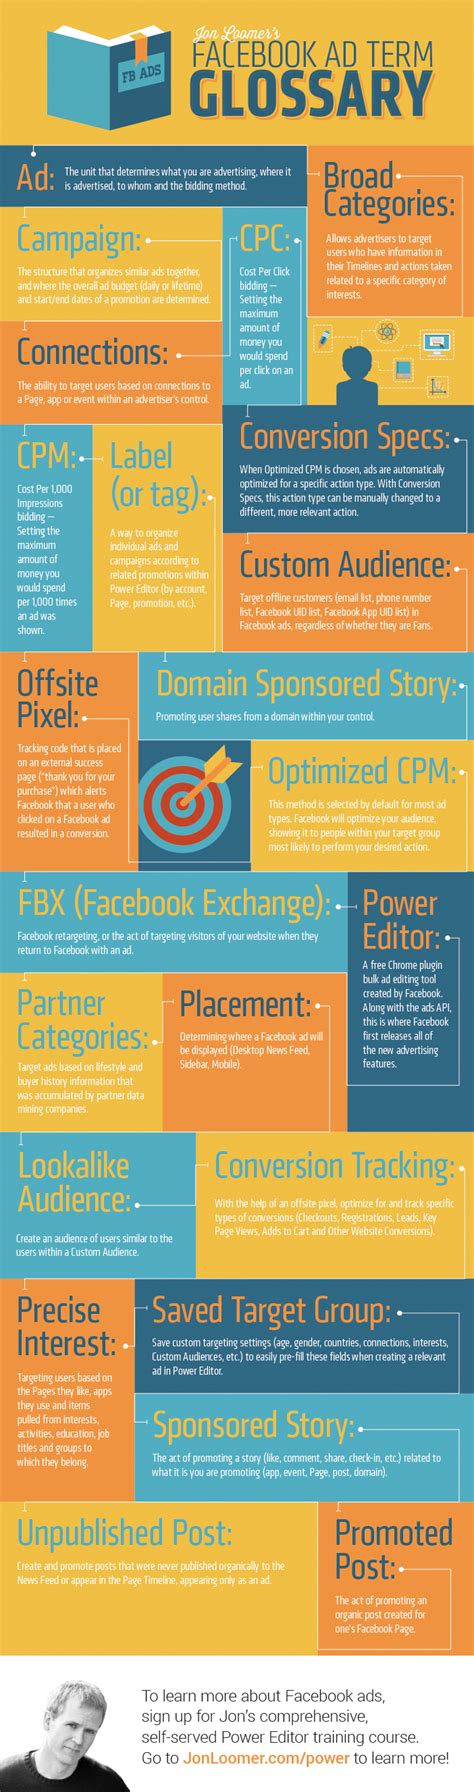 Friday Infographic Facebook Ad Term Glossary State Of Digital